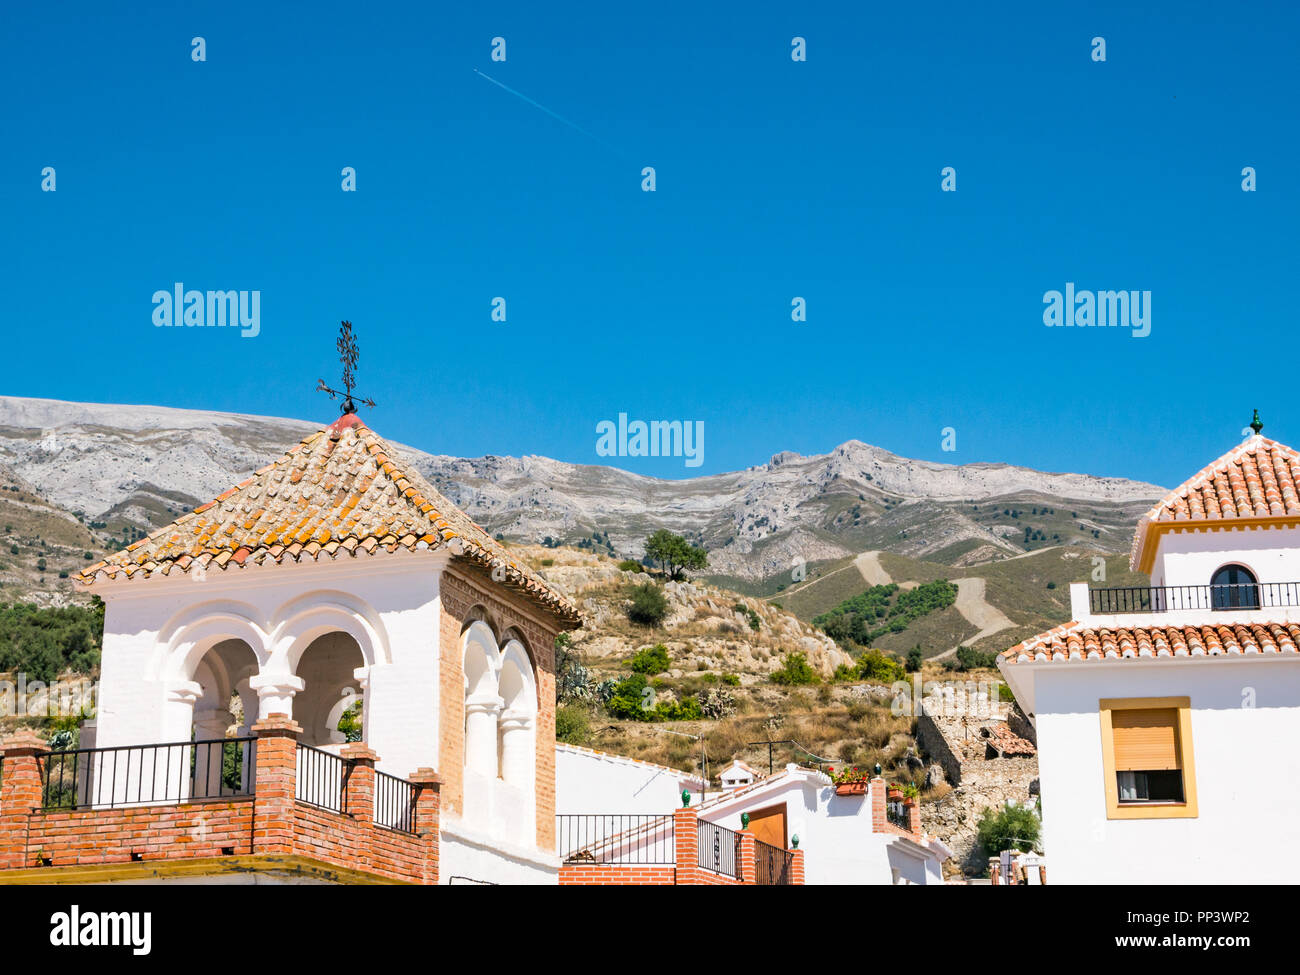 Picturesque tiled rooftops with mountain backdrop in old traditional hilltop village with plane jet trail in sky, Sedella, Axarquia, Andalusia, Spain Stock Photo